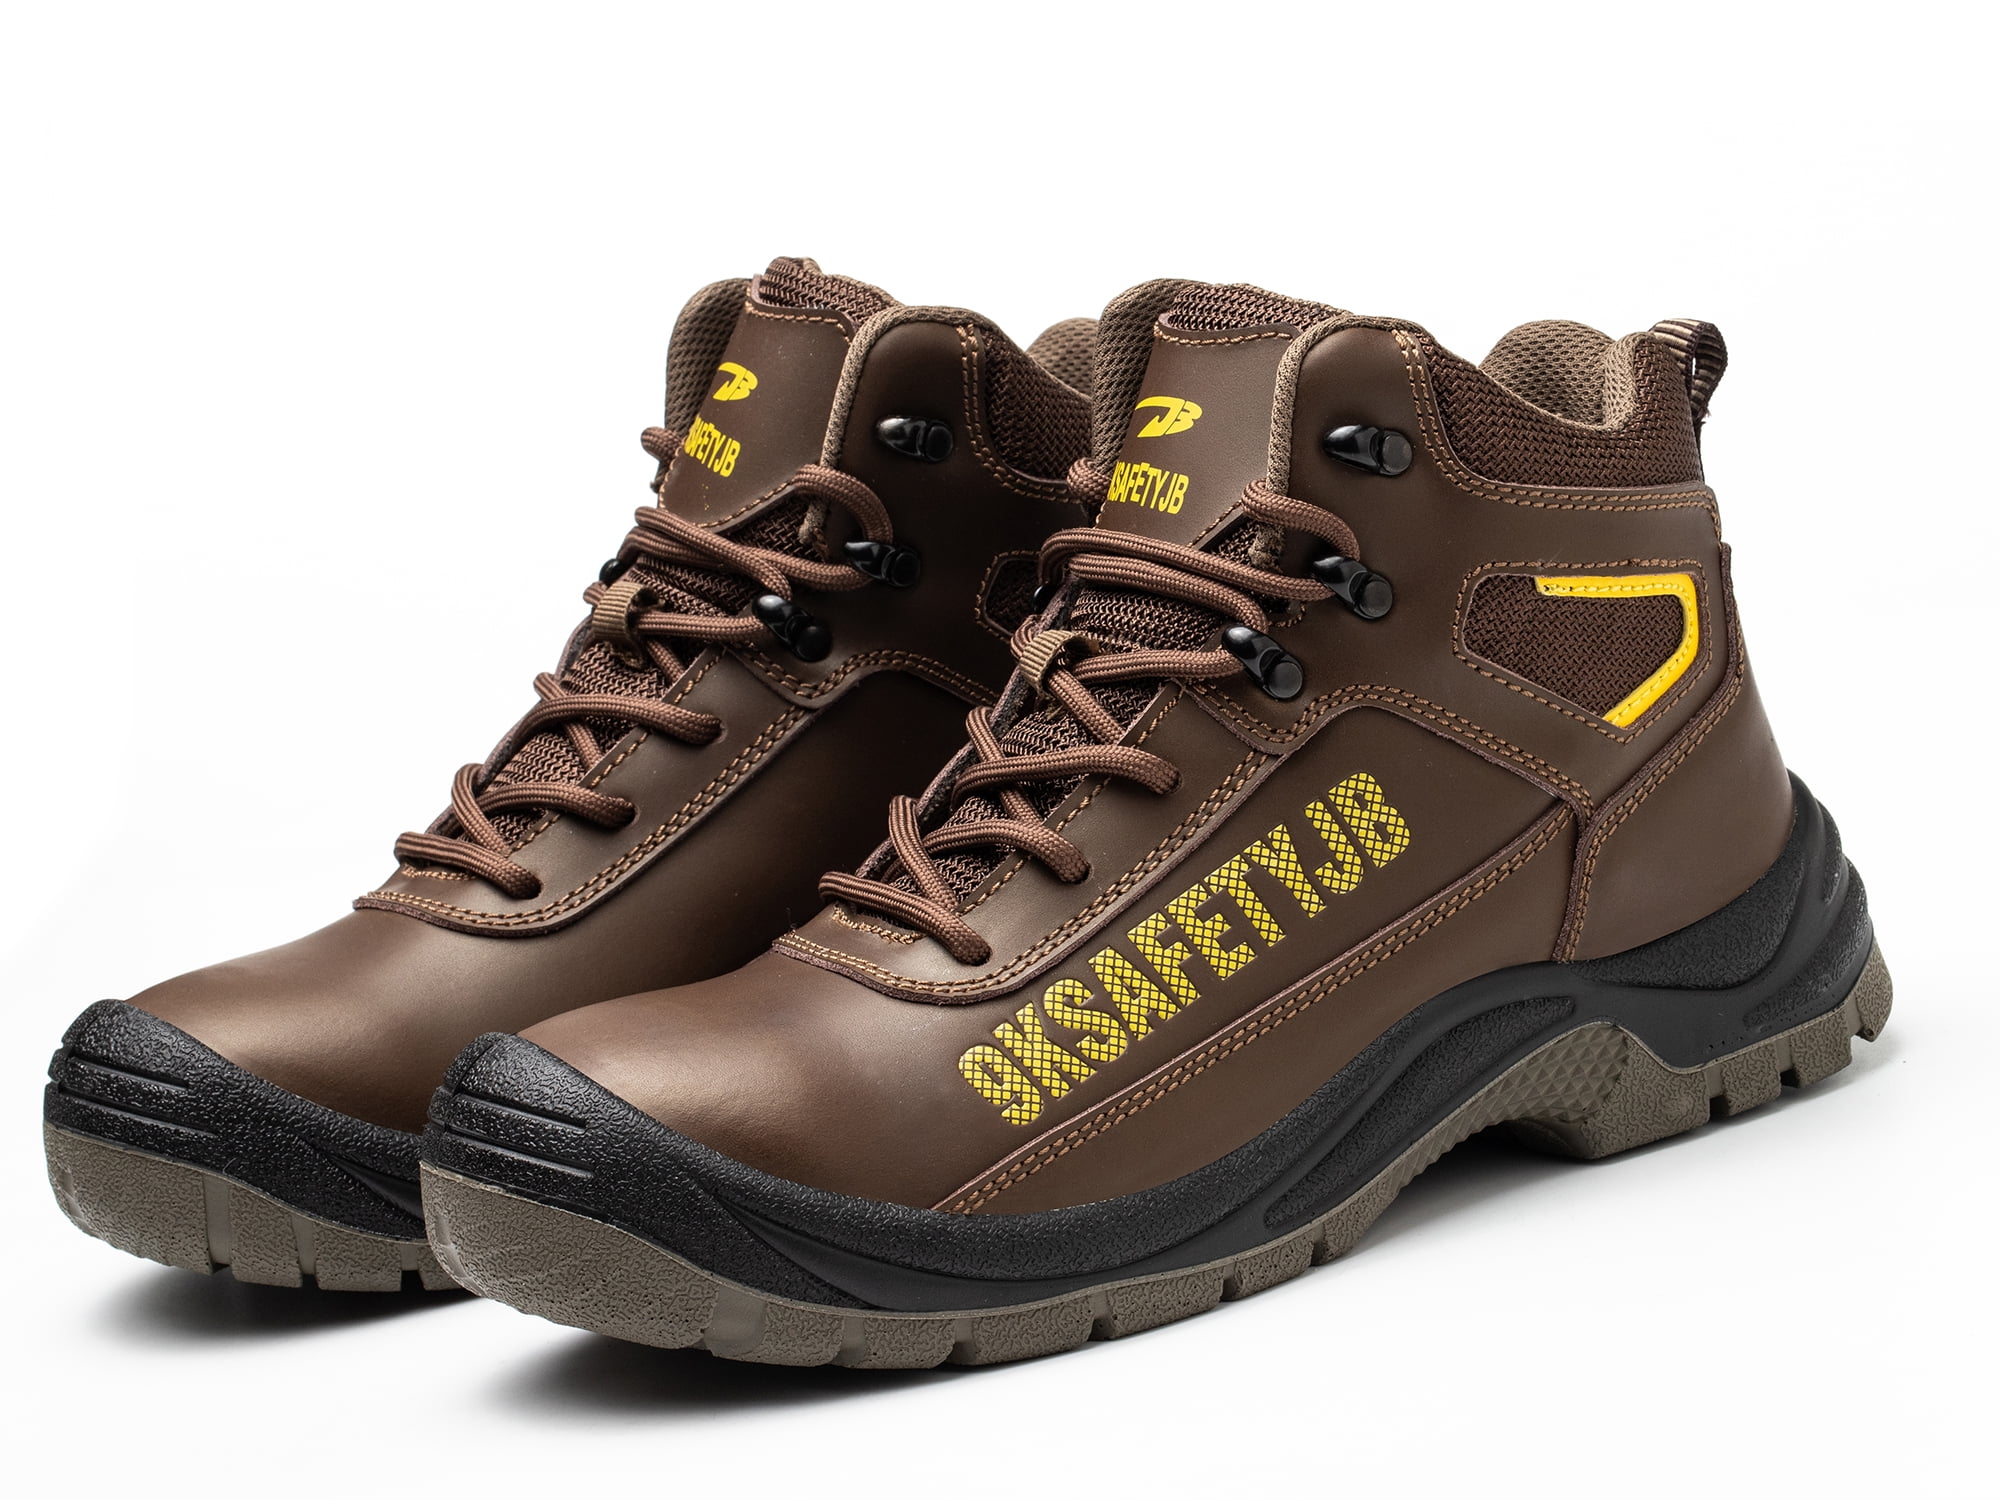 Men's Safety Waterproof Work Shoes Steel Toe Ankle Boots Indestructible Sneakers 